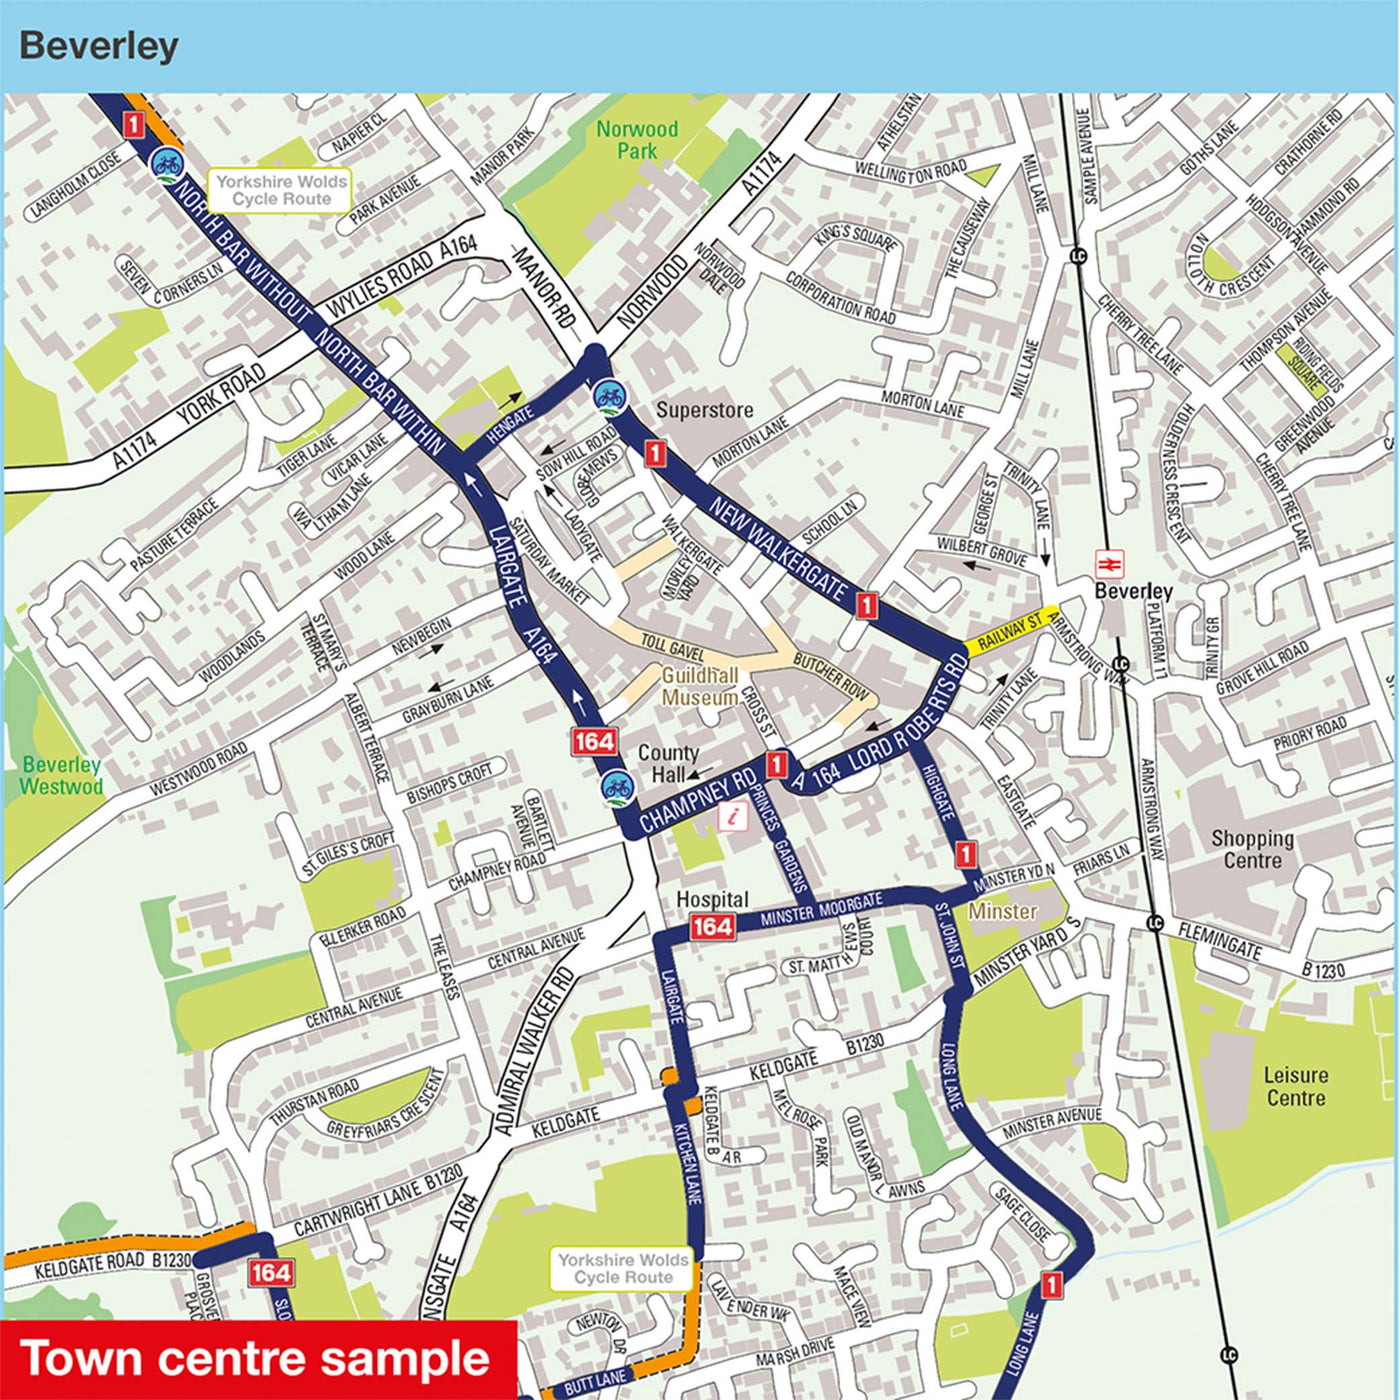 Town centre sample: Beverly, featuring routes 1 and 164